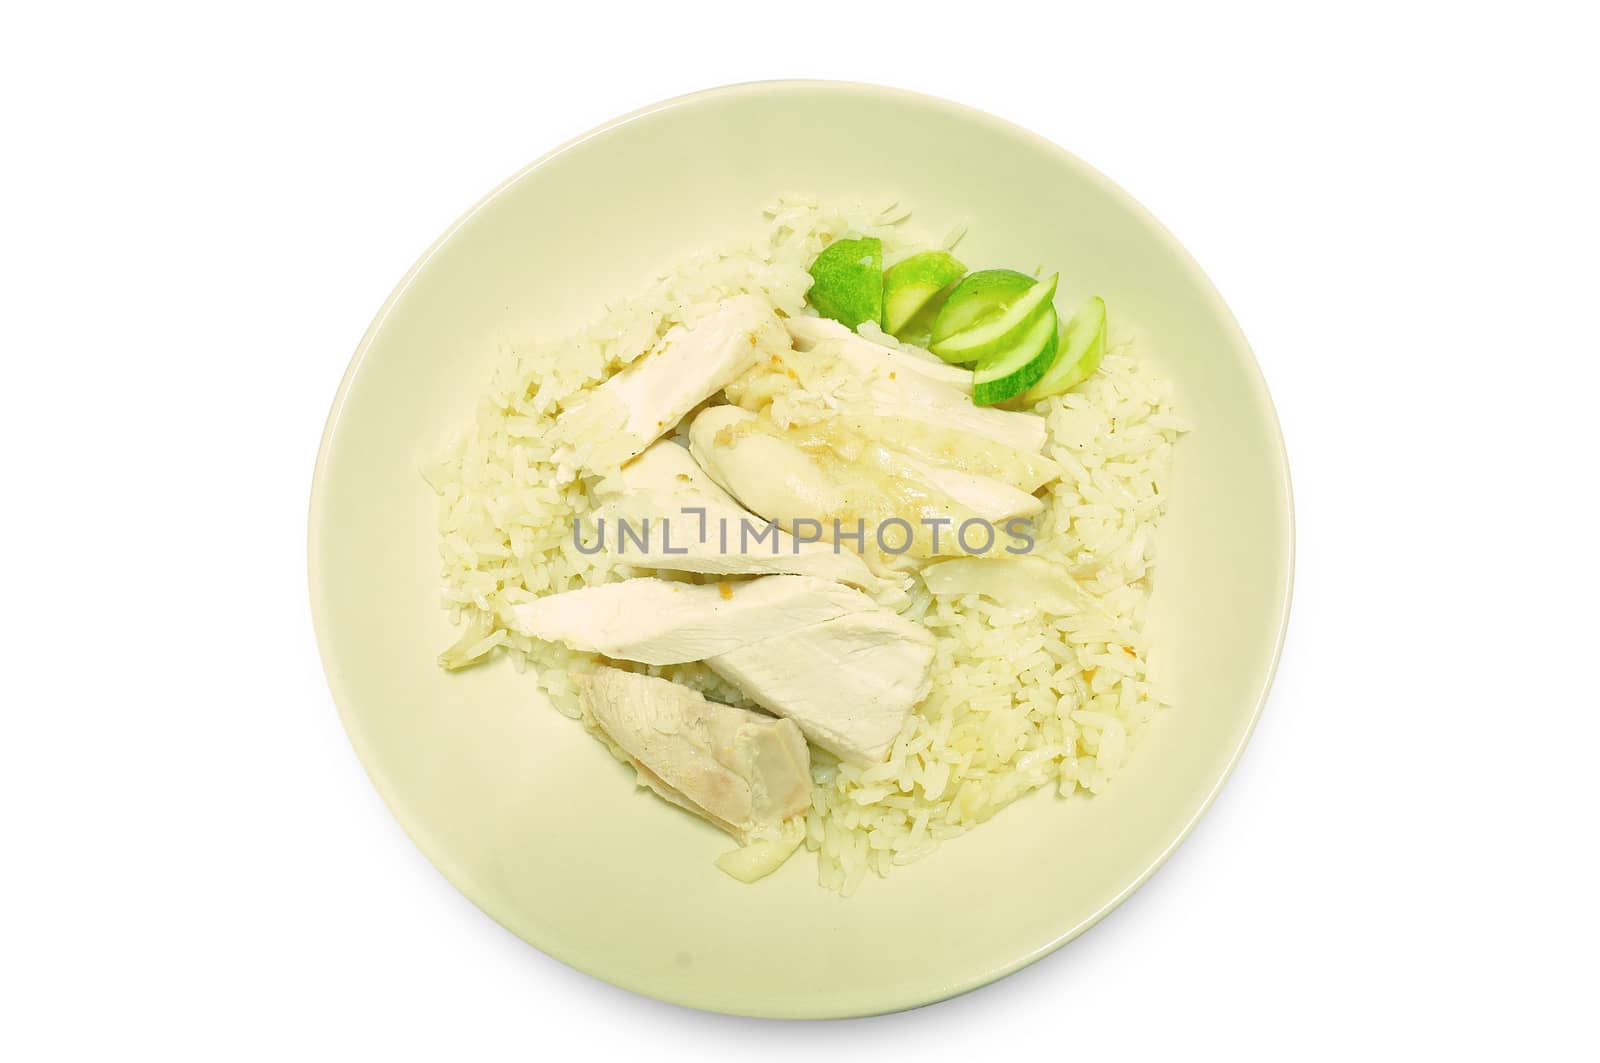 sliced Hainan-style chicken with marinated rice and sauce (Hainanese chicken rice)